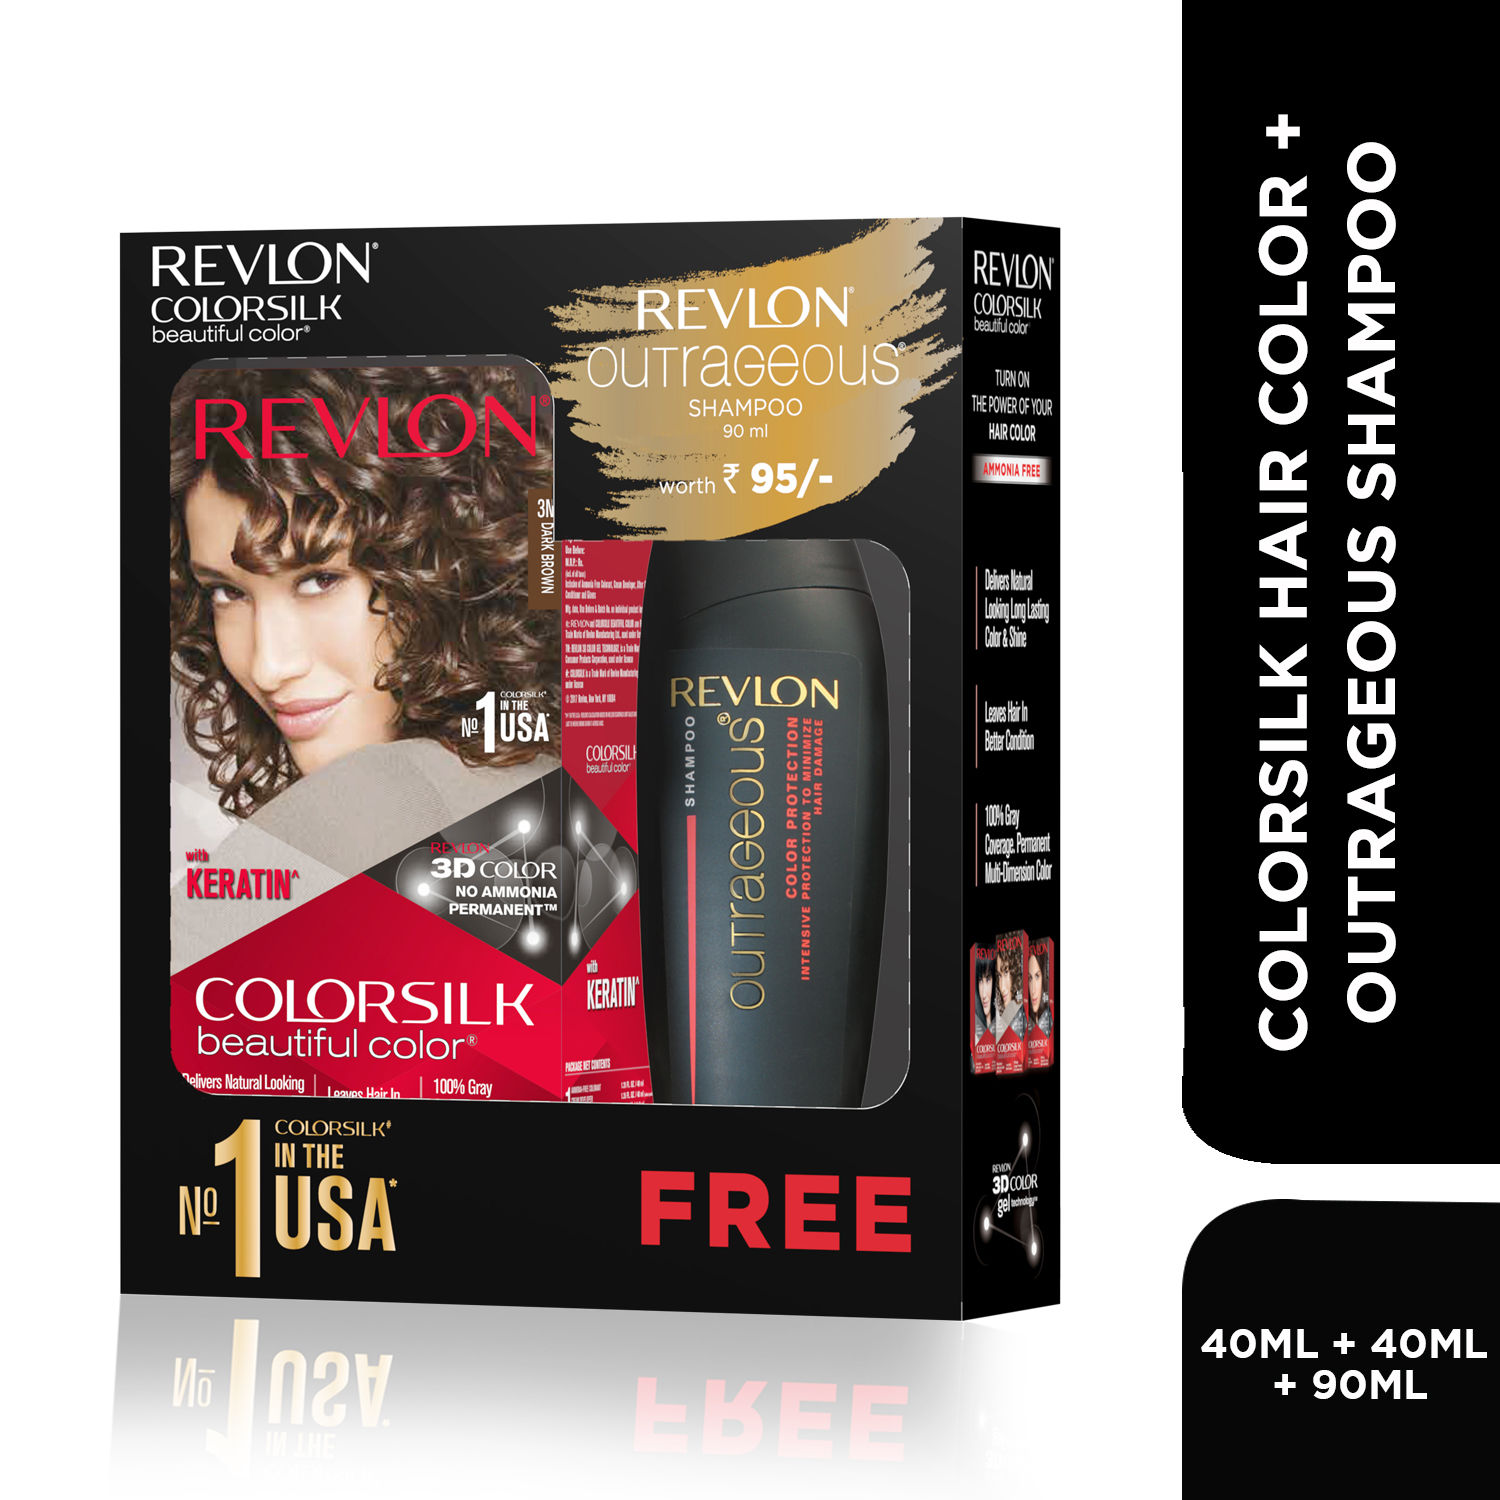 Buy Revlon ColorSilk Hair Color with Keratin - 3N Dark Brown - (with Outrageous Shampoo 90 ml) - Purplle